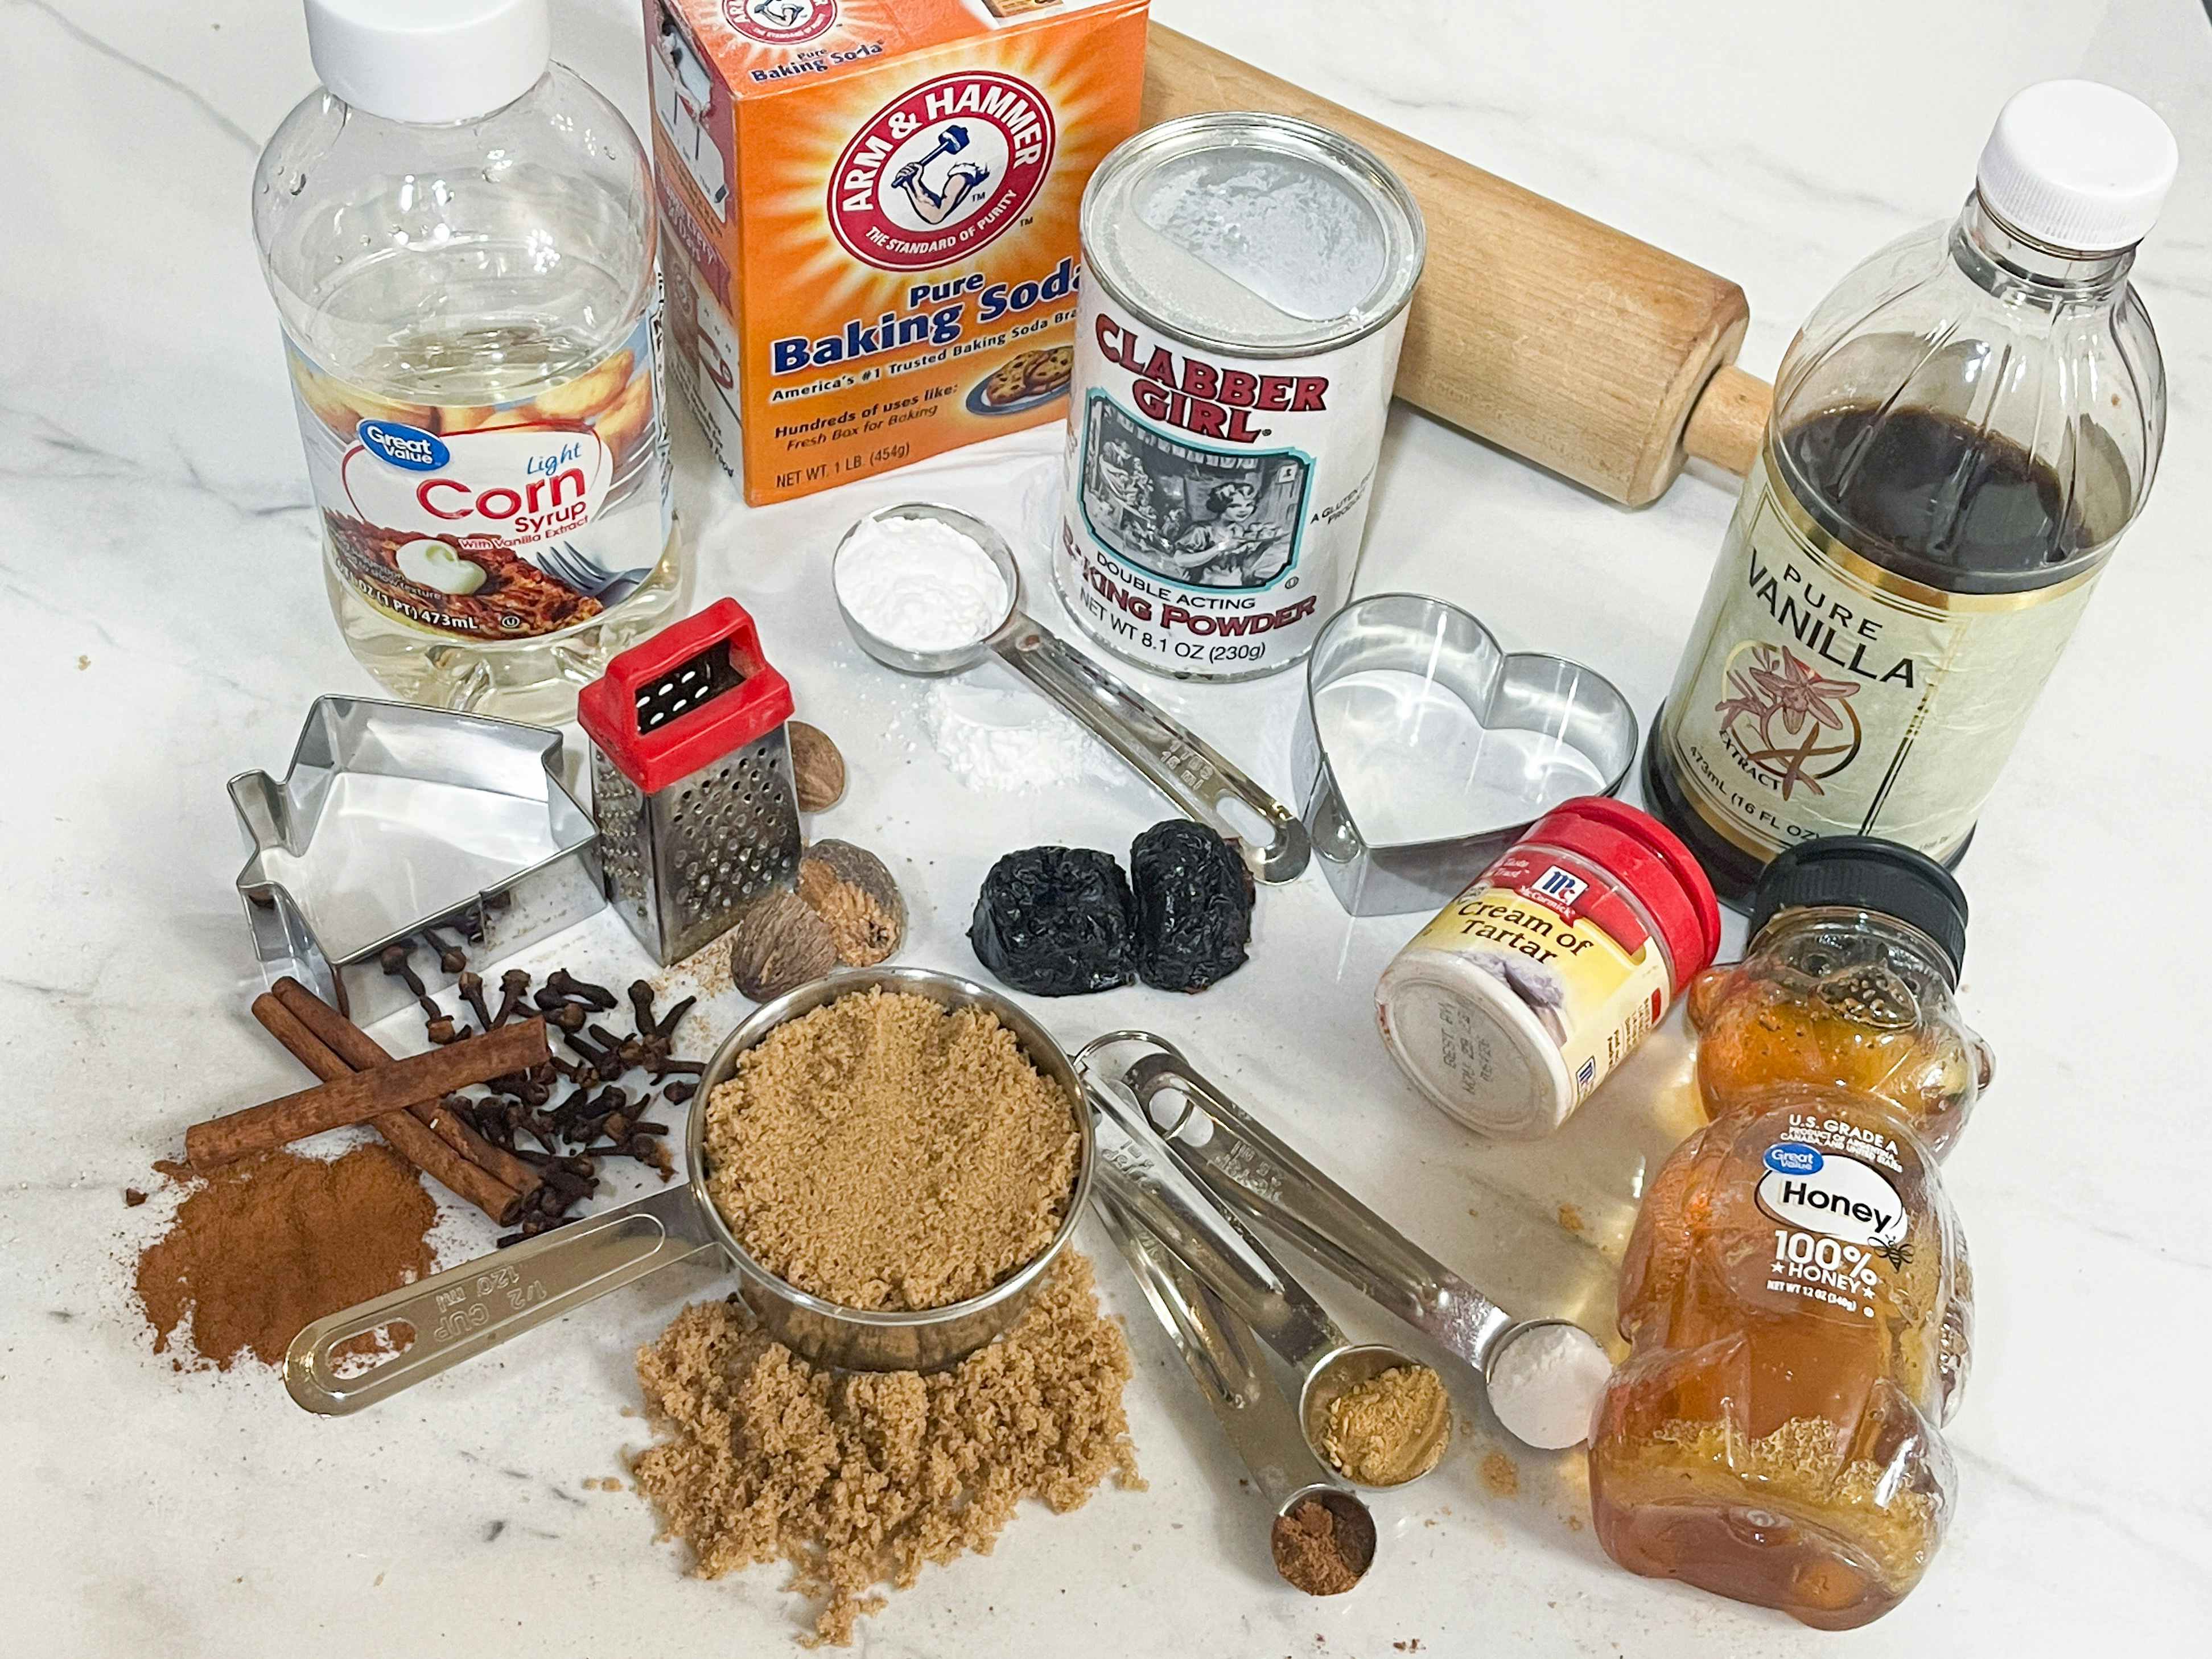 96 Baking Substitutes For Common Ingredients